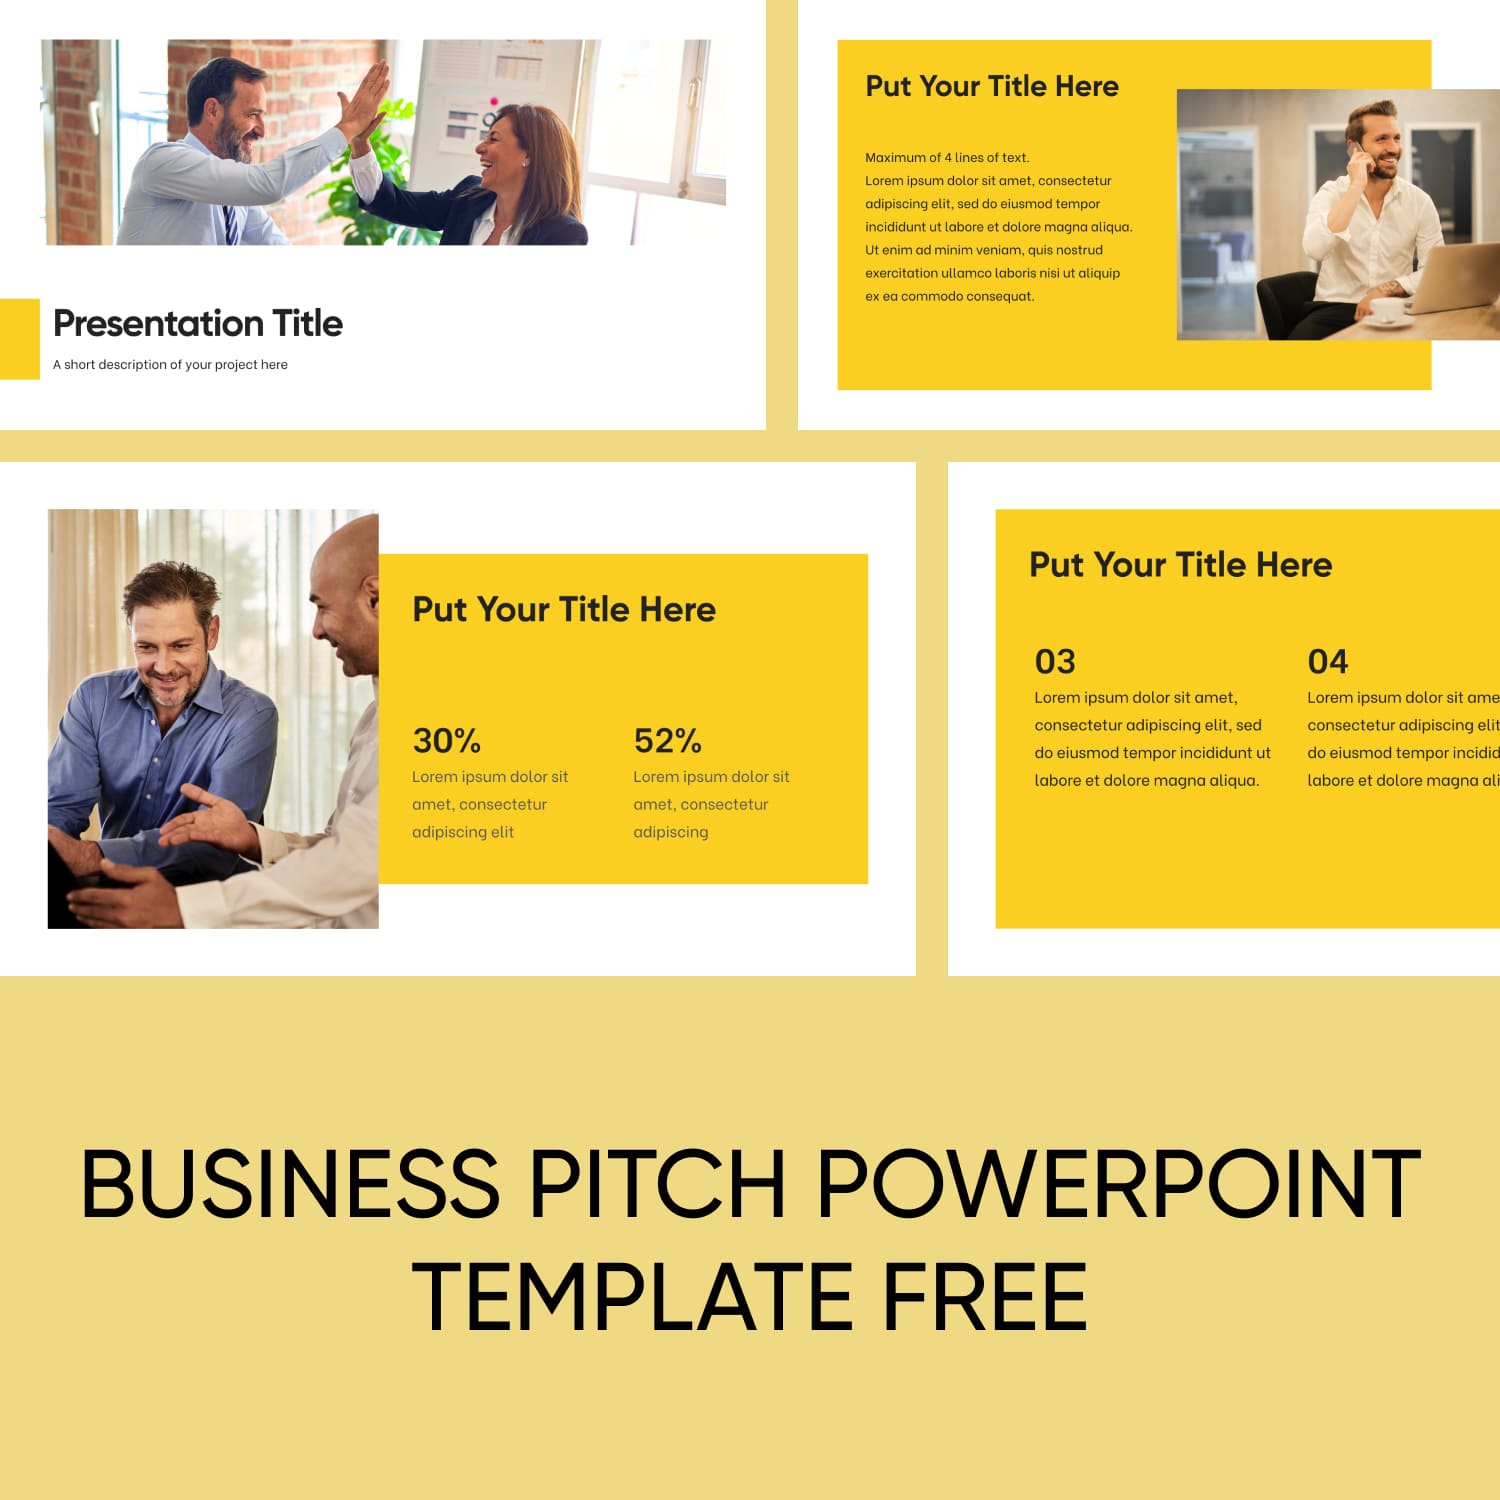 Business Pitch Powerpoint Template Free 1500 1500 1.